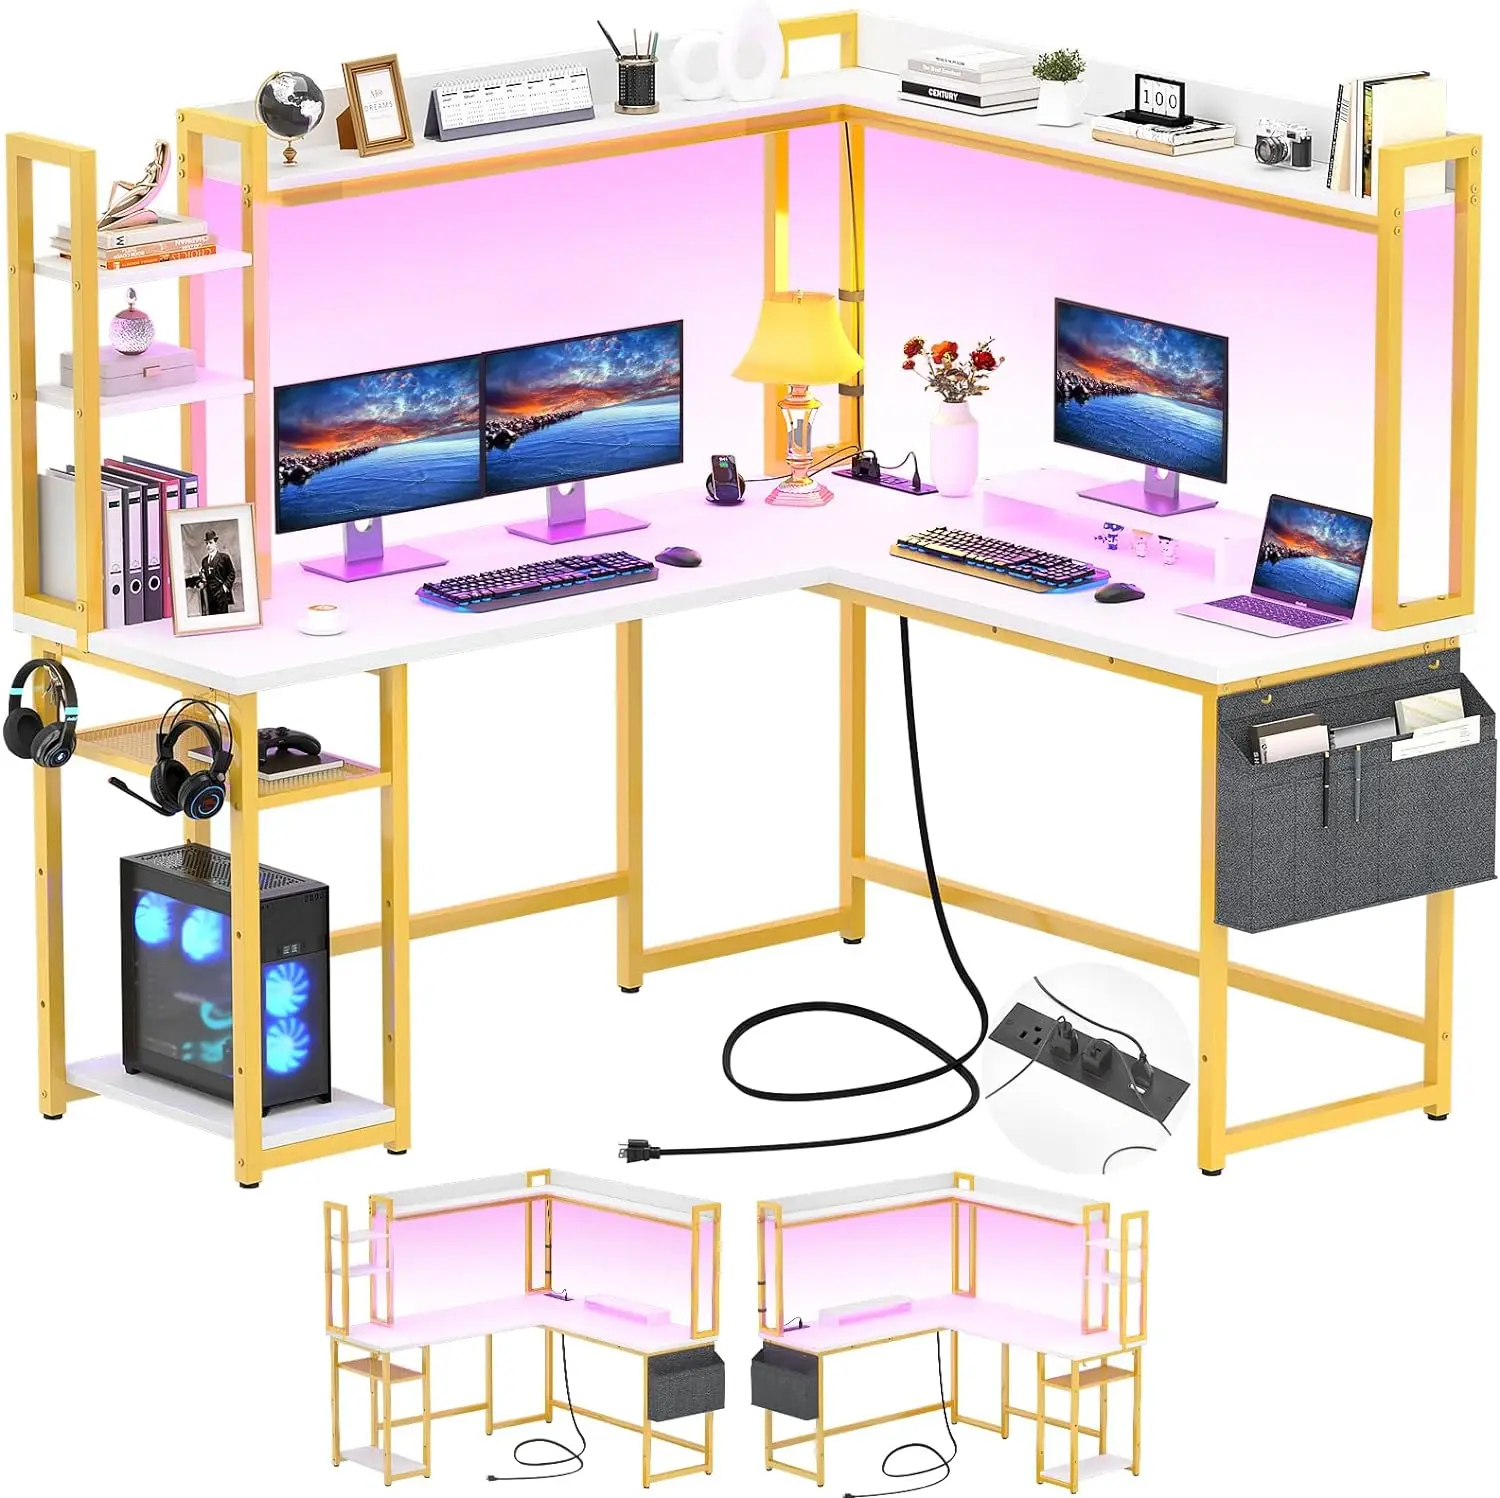 Aheaplus L Shaped Desk with Power Outlet, L Shaped Gaming Desk with Led Light & Hutch, Reversible Home Office Desk aheaplus l shaped desk power outlet led light